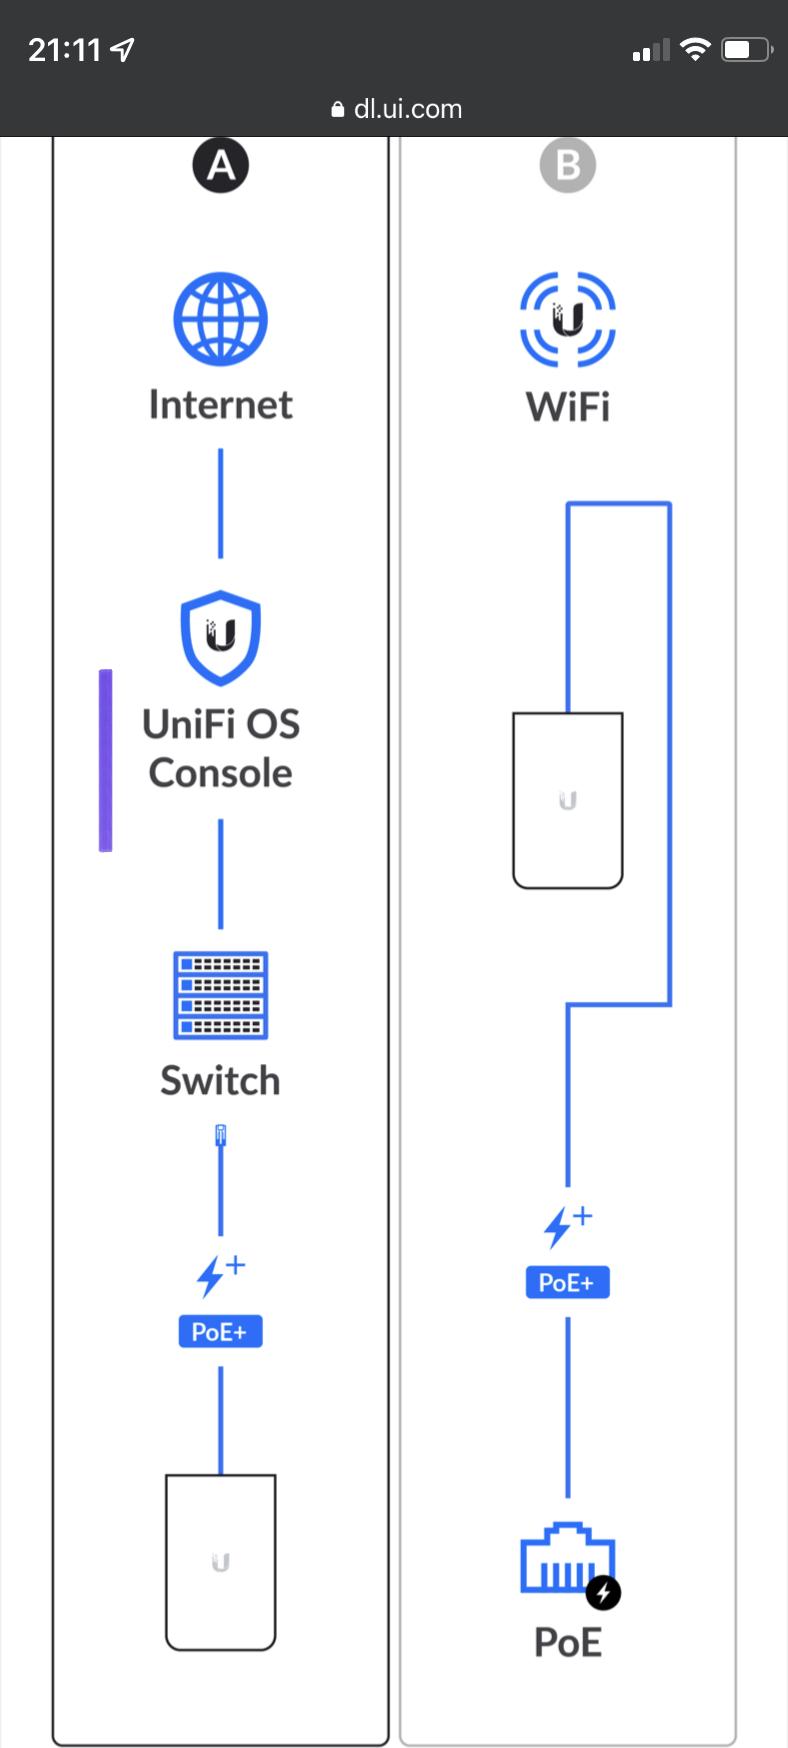 Im confused about ubiquiti pic